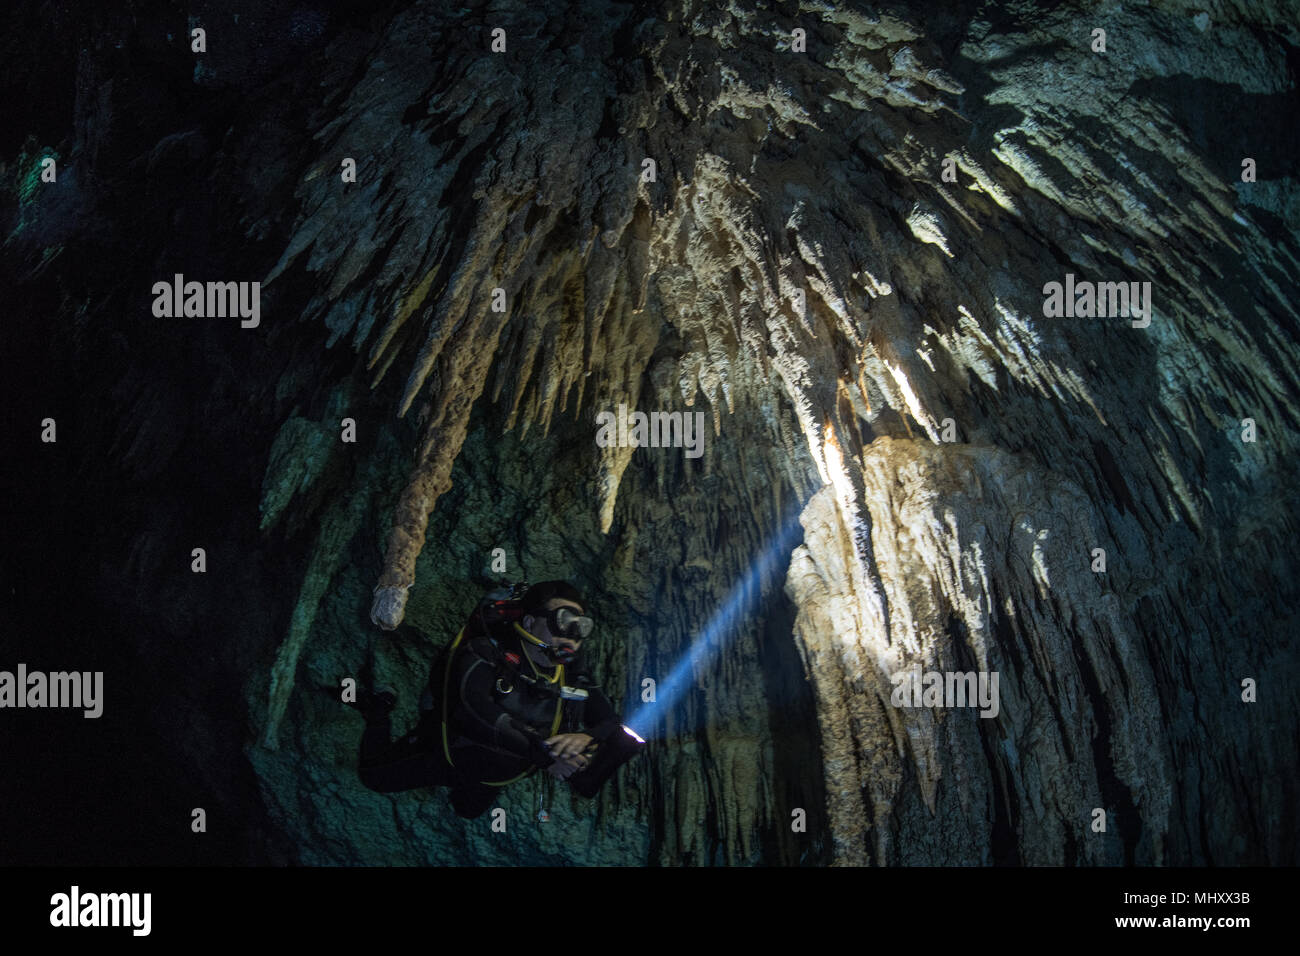 Male diver diving in underground river (cenote) with stalactite rock formations, Tulum, Quintana Roo, Mexico Stock Photo